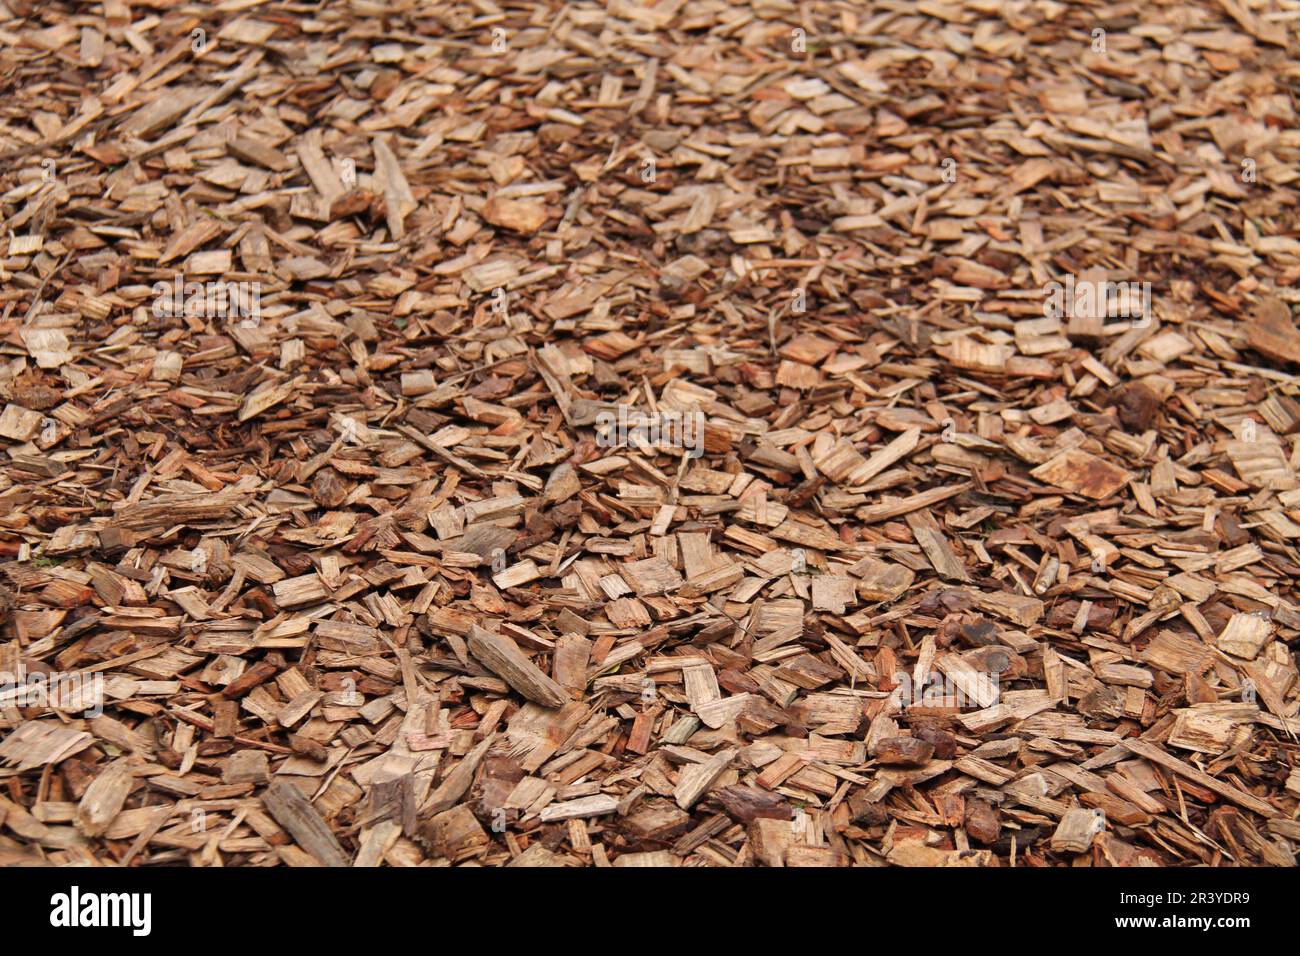 A Textured Background Image of Fresh Wood Chips. Stock Photo